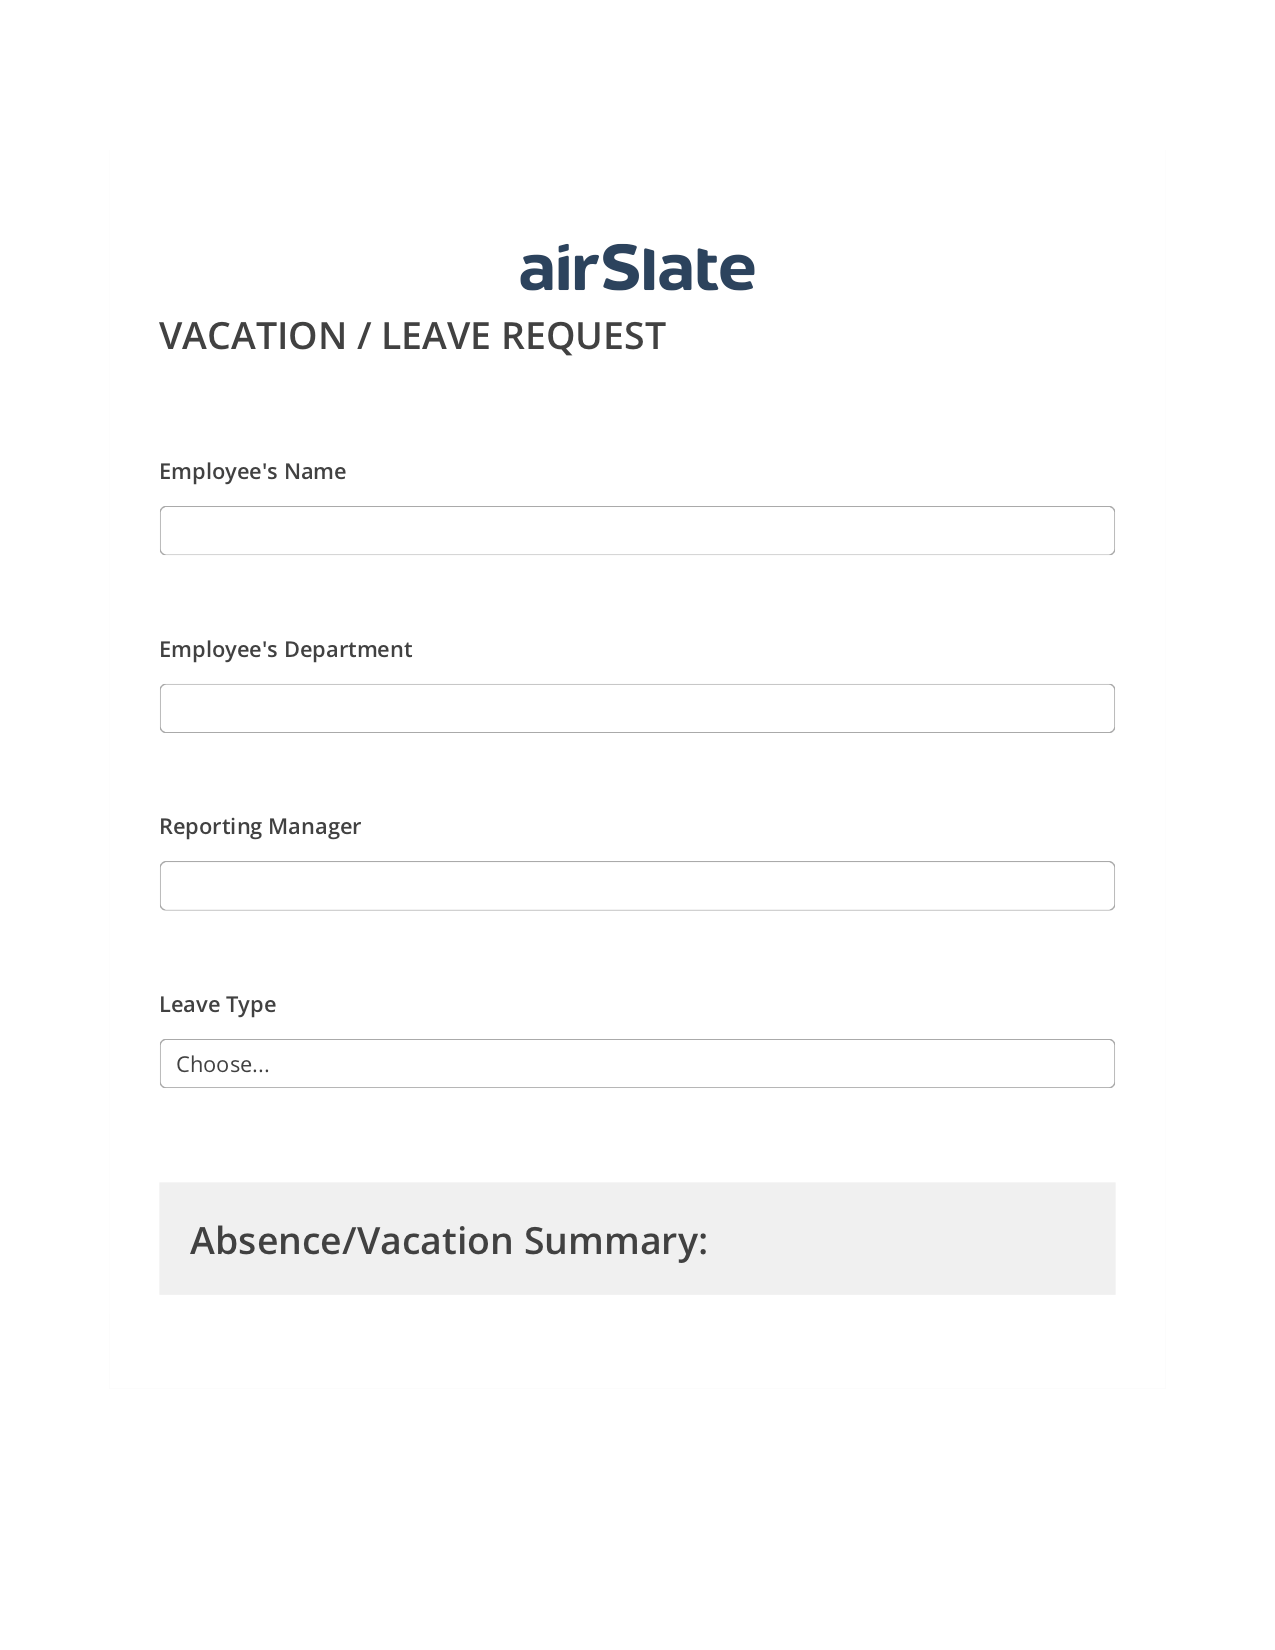 Vacation/Leave Request Workflow Pre-fill from another Slate Bot, Update MS Dynamics 365 Record Bot, Webhook Postfinish Bot